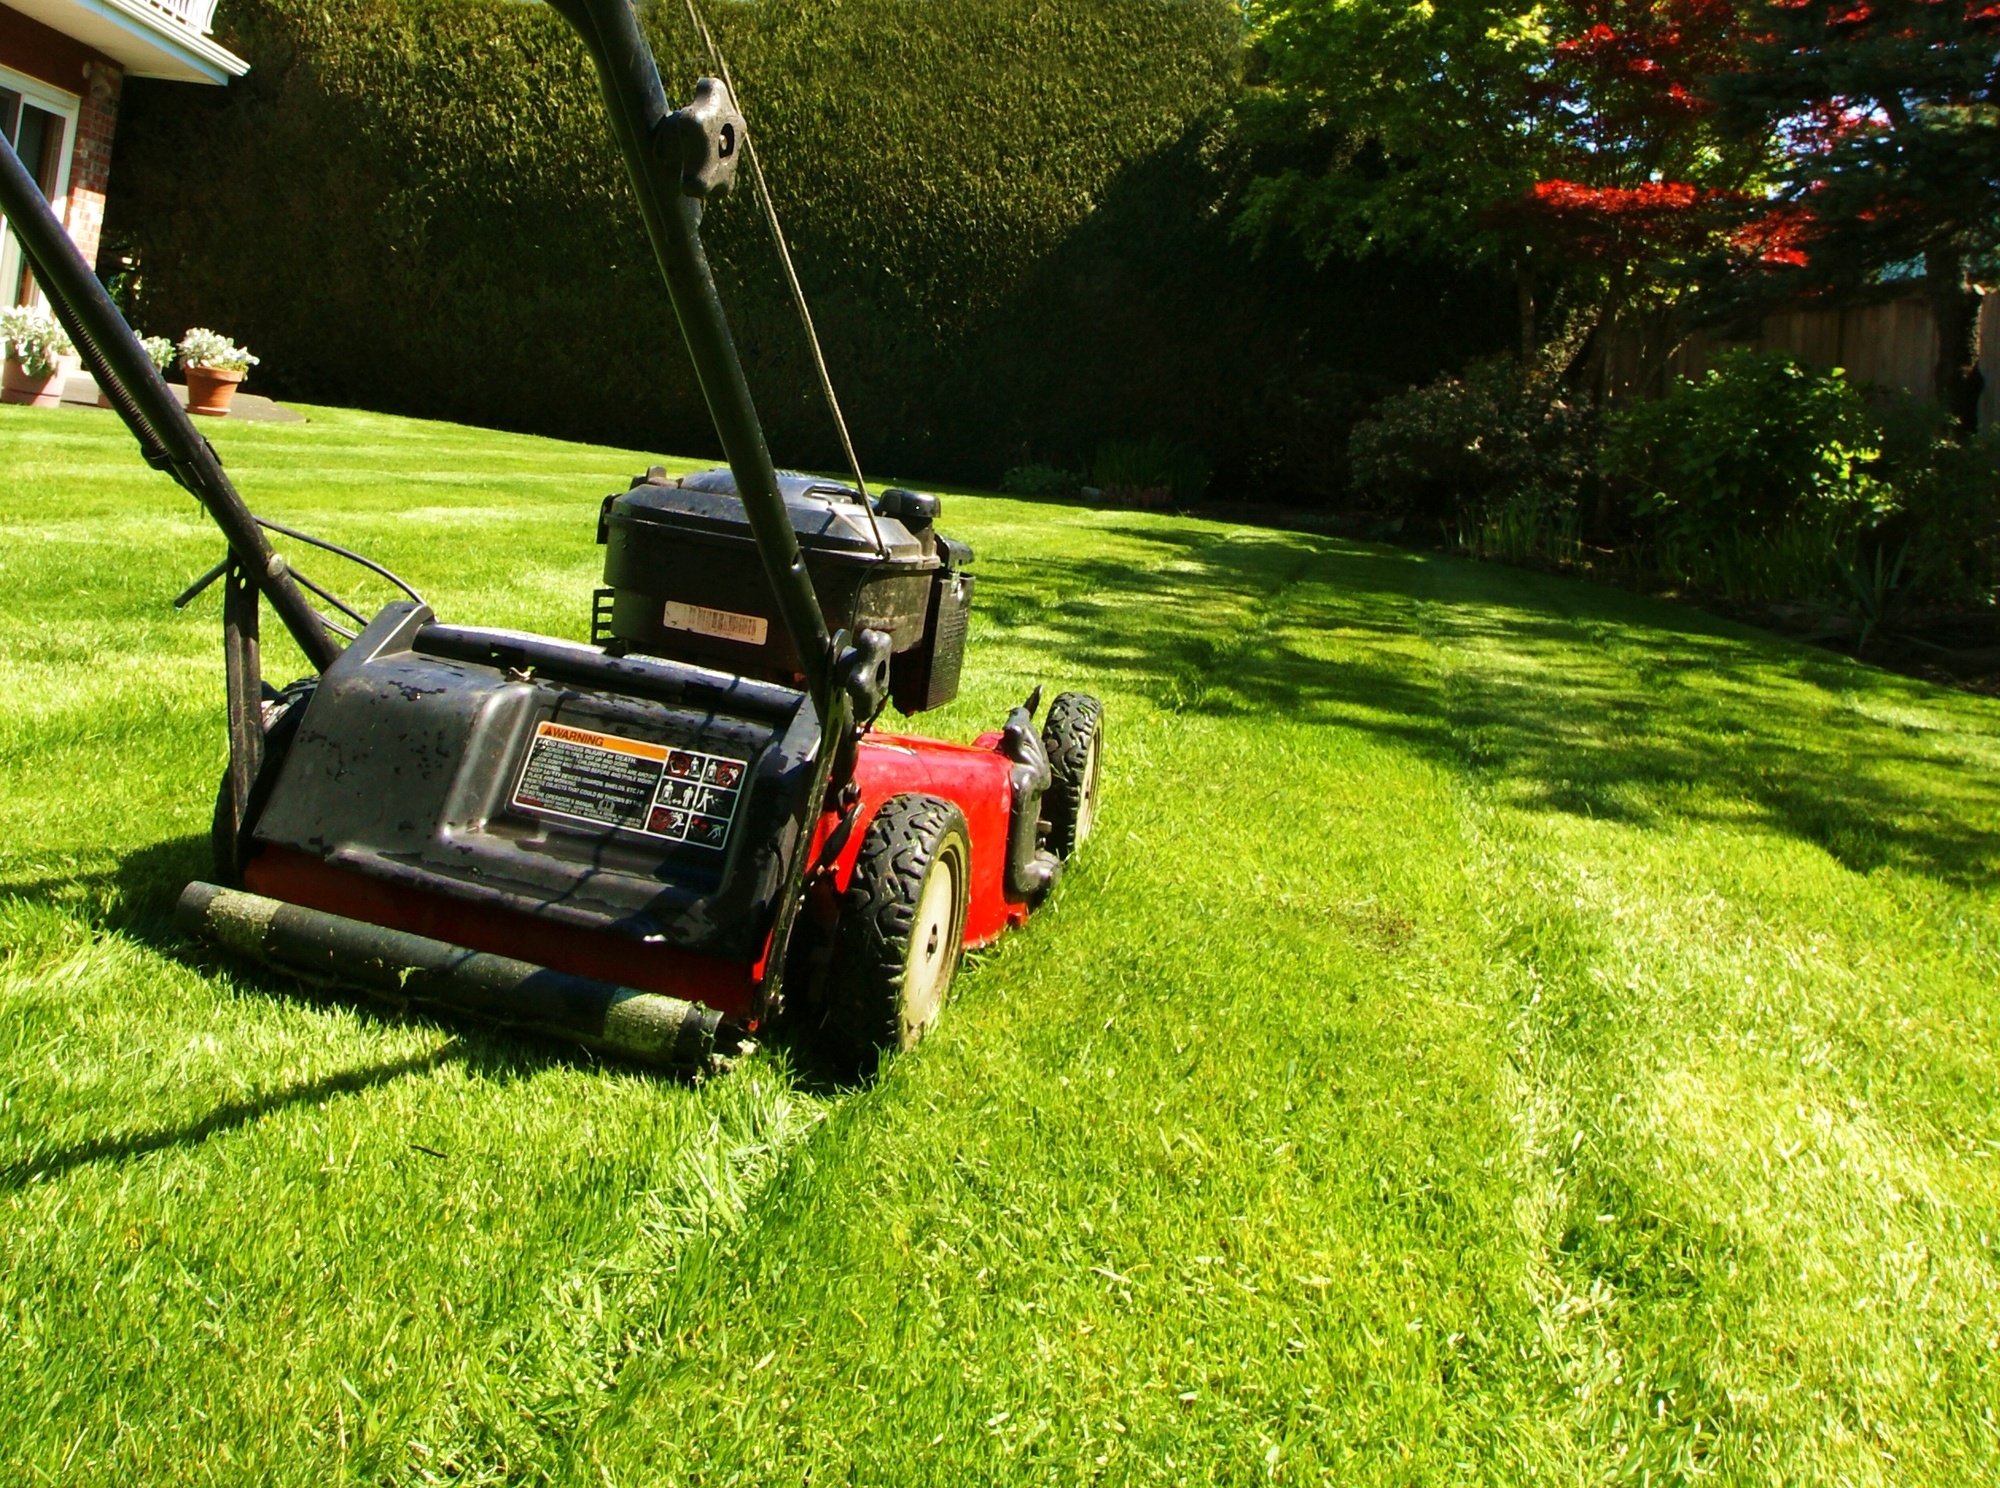 Lawncare 101: How To Choose A Lawn Mower For Your Type Of Yard